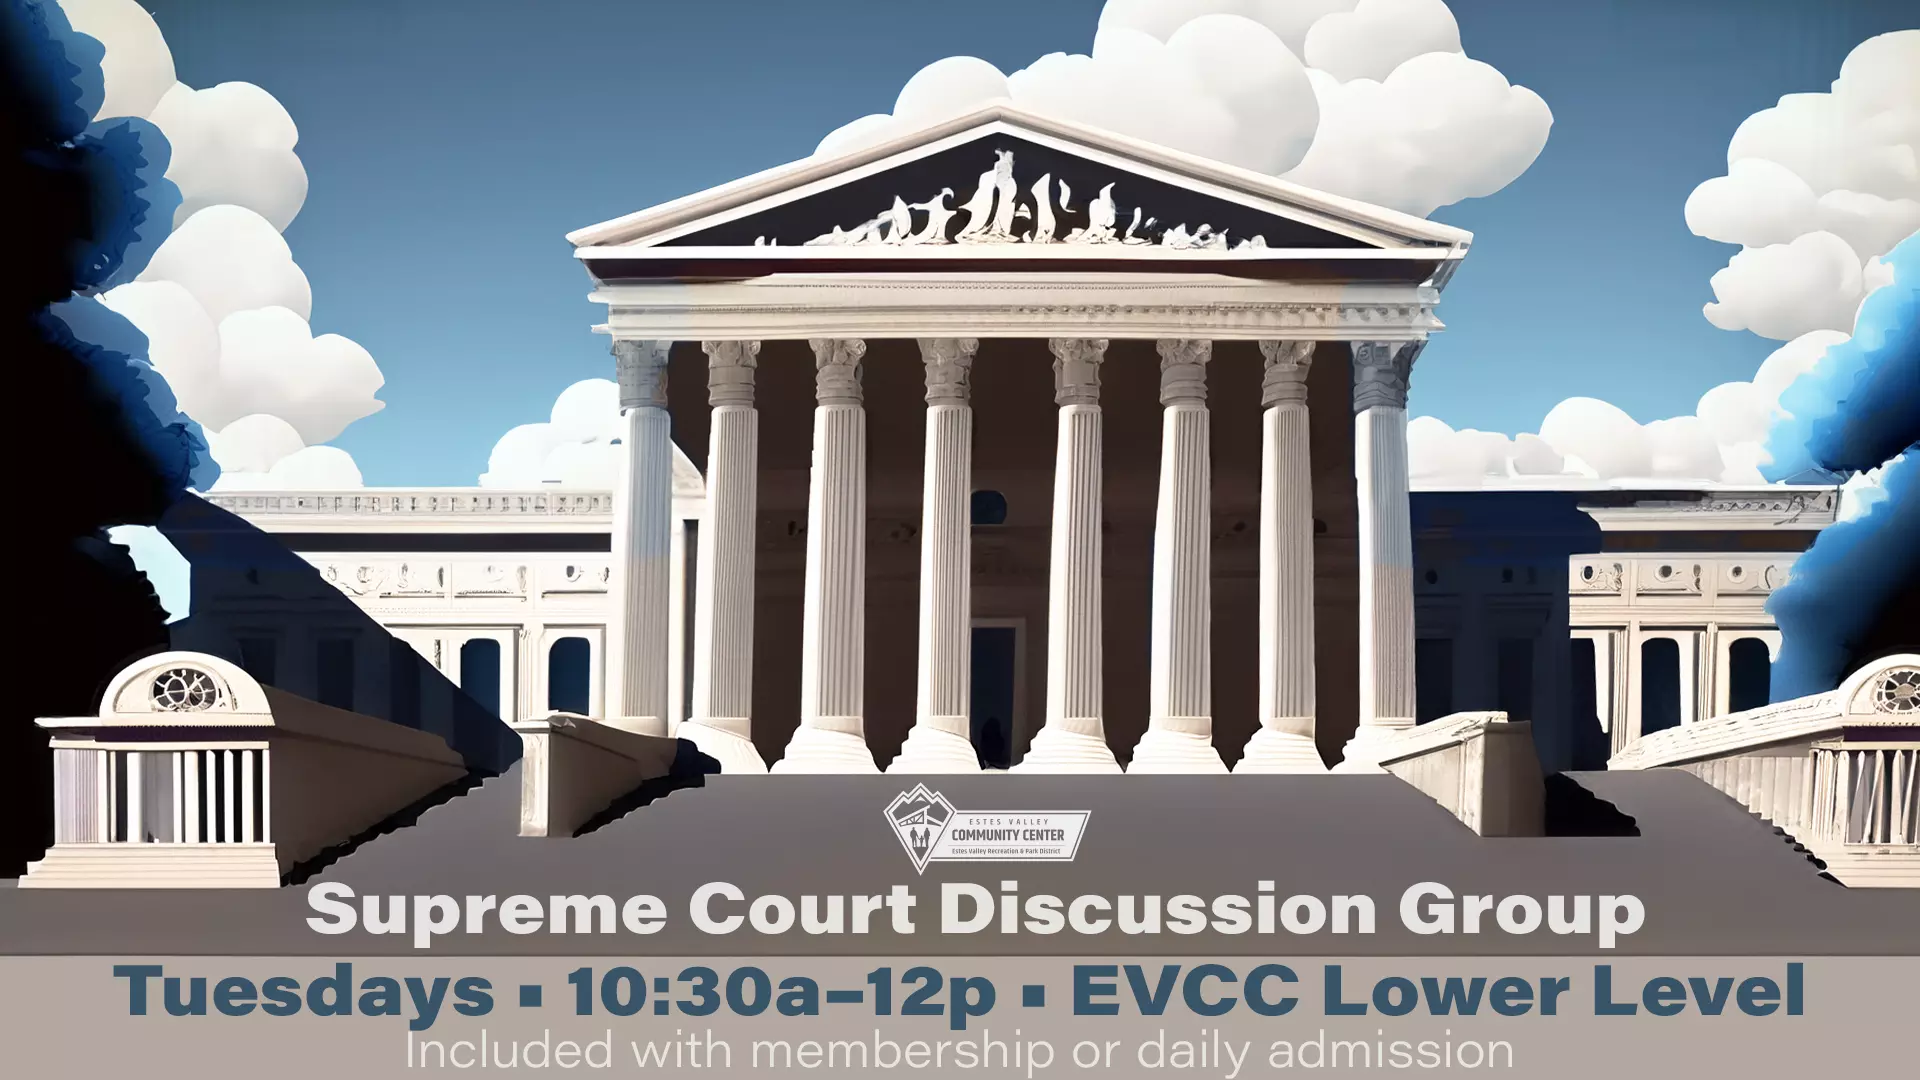 Supreme Court Discussion Group